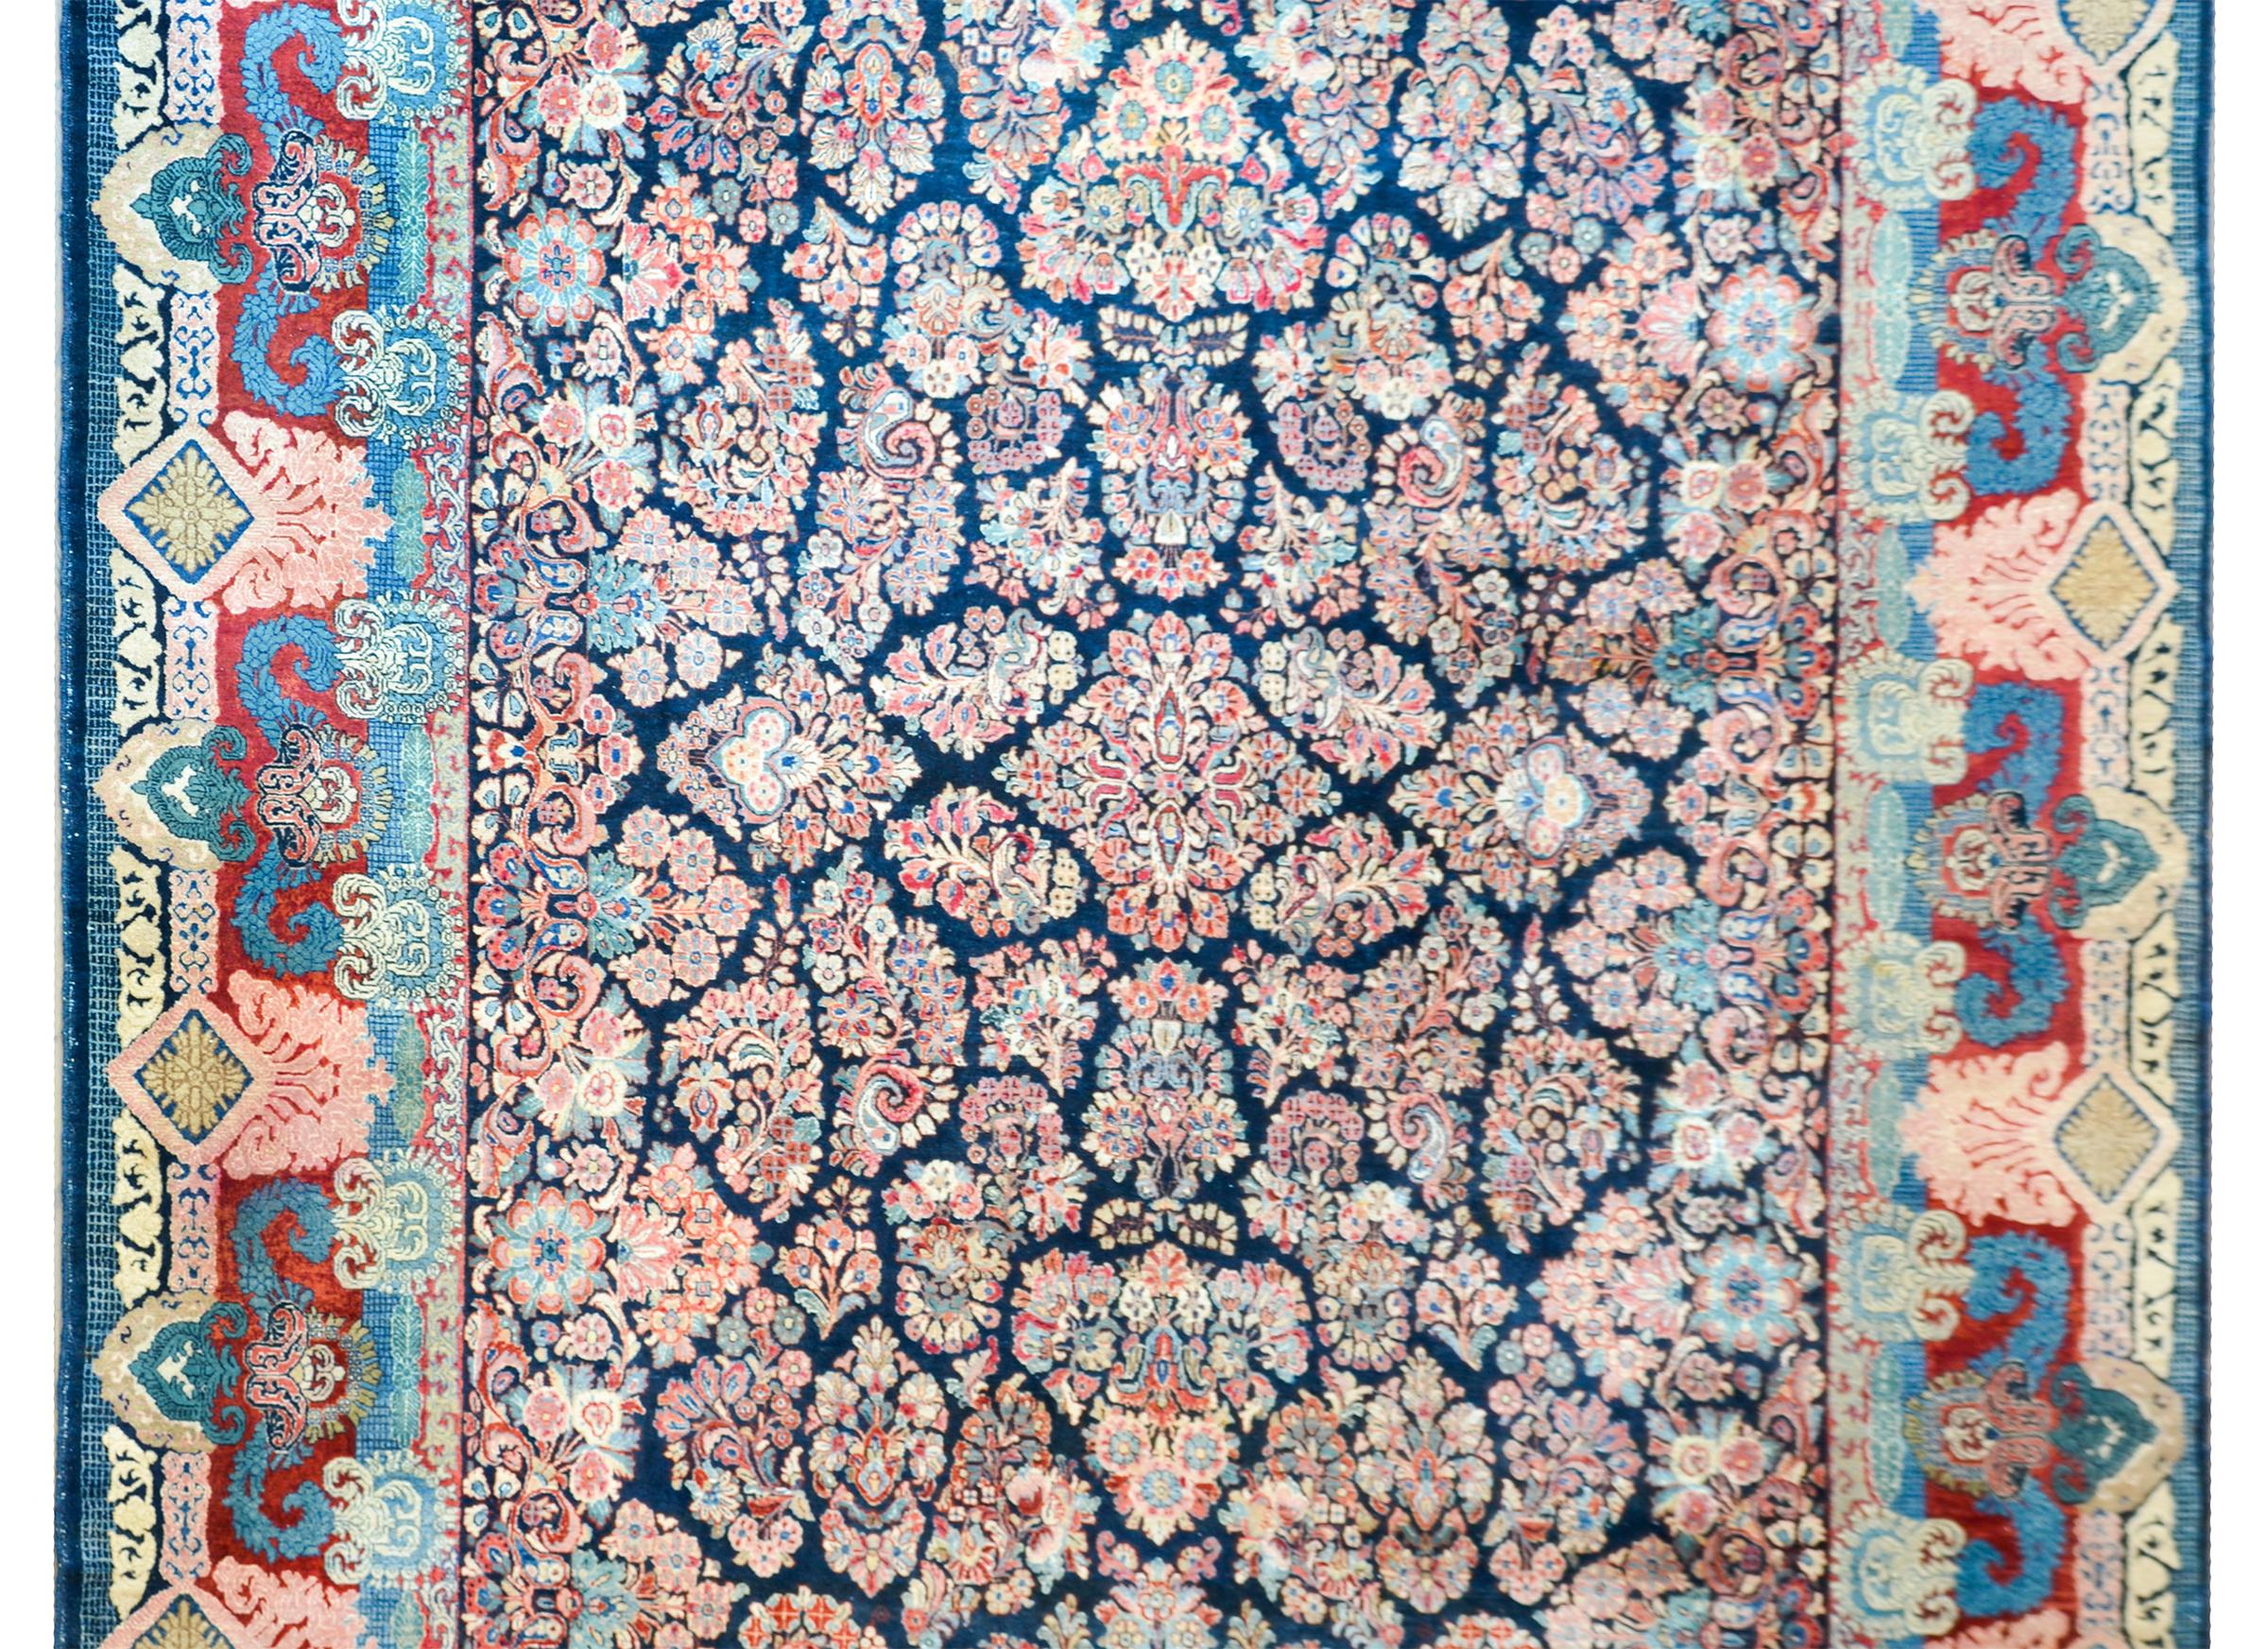 A striking early 20th century Persian Sarouk rug with an unusual mirrored floral cluster pattern woven in traditional pinks, indigos, creams, and cranberries, against a dark indigo background. The border is wide with multiple large-scale floral